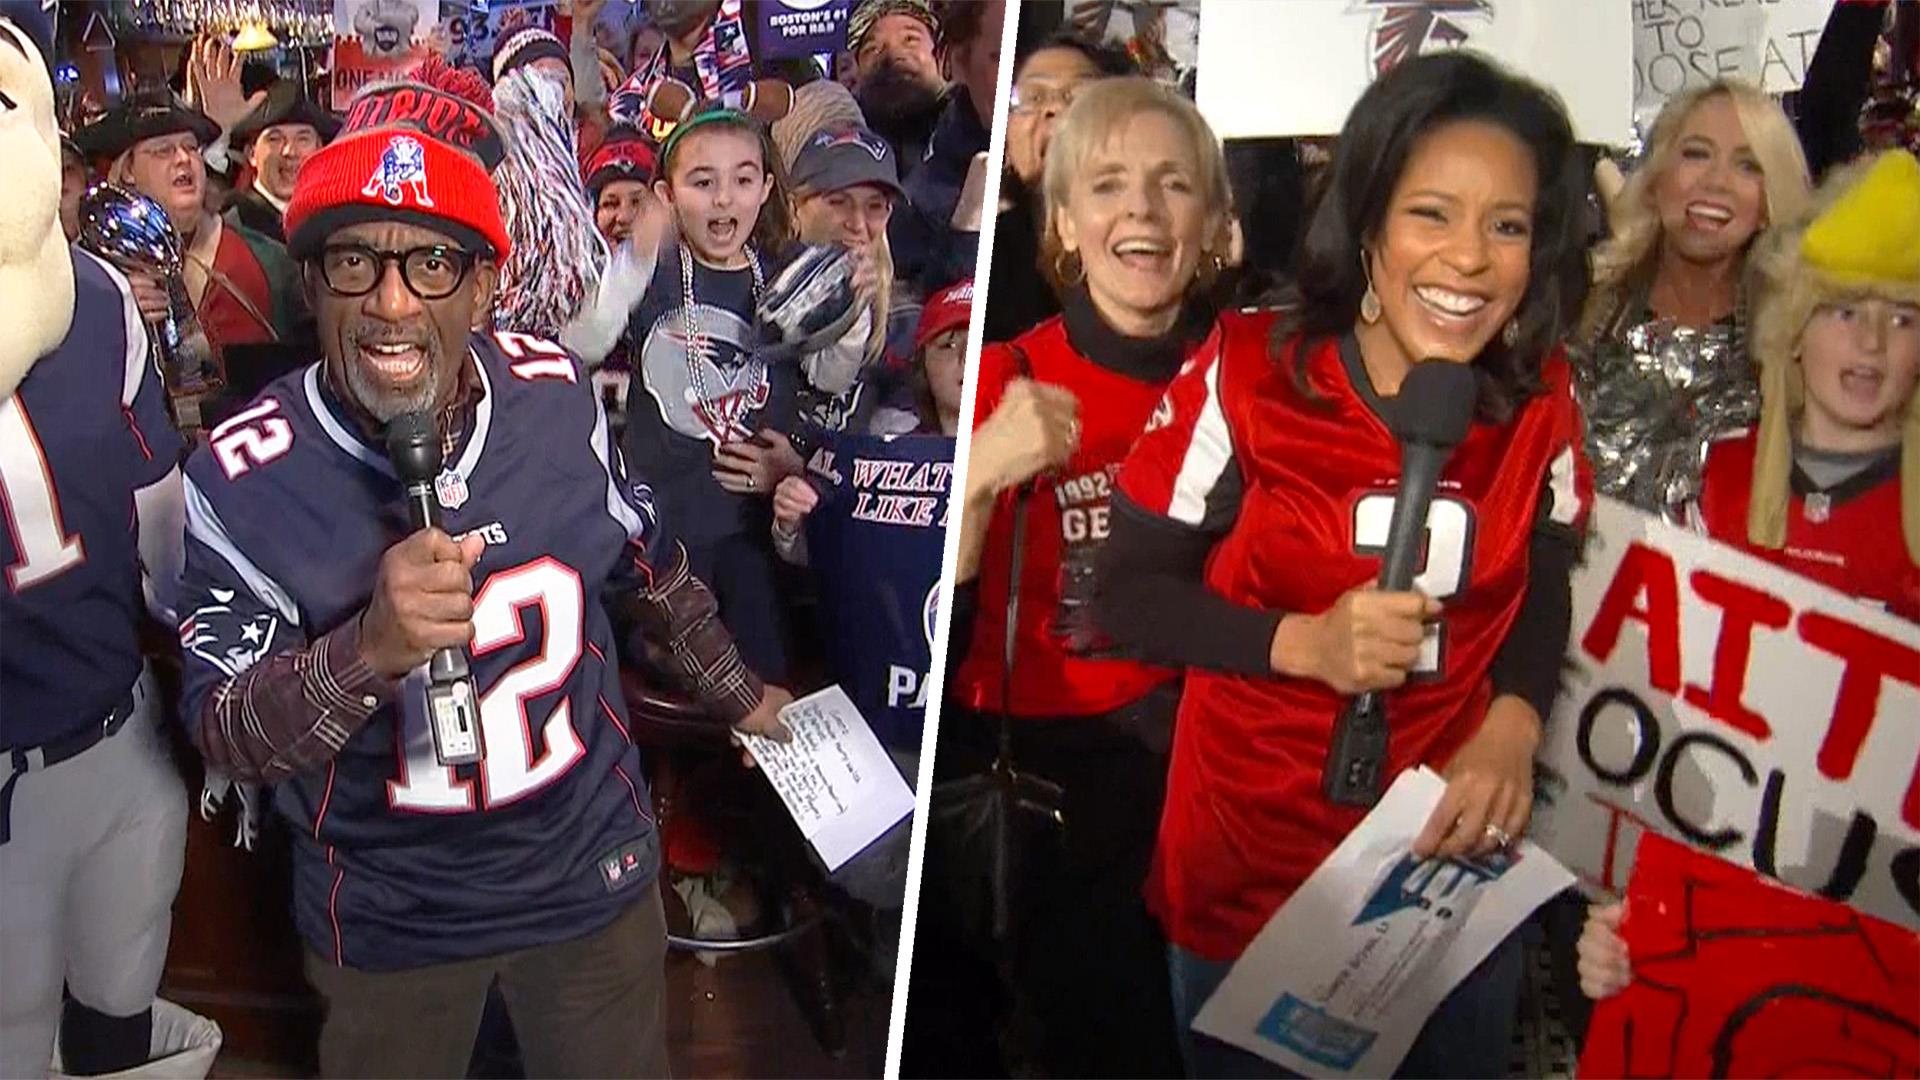 Al Roker and Sheinelle Jones rally for Super Bowl with Falcons and Patriots fans